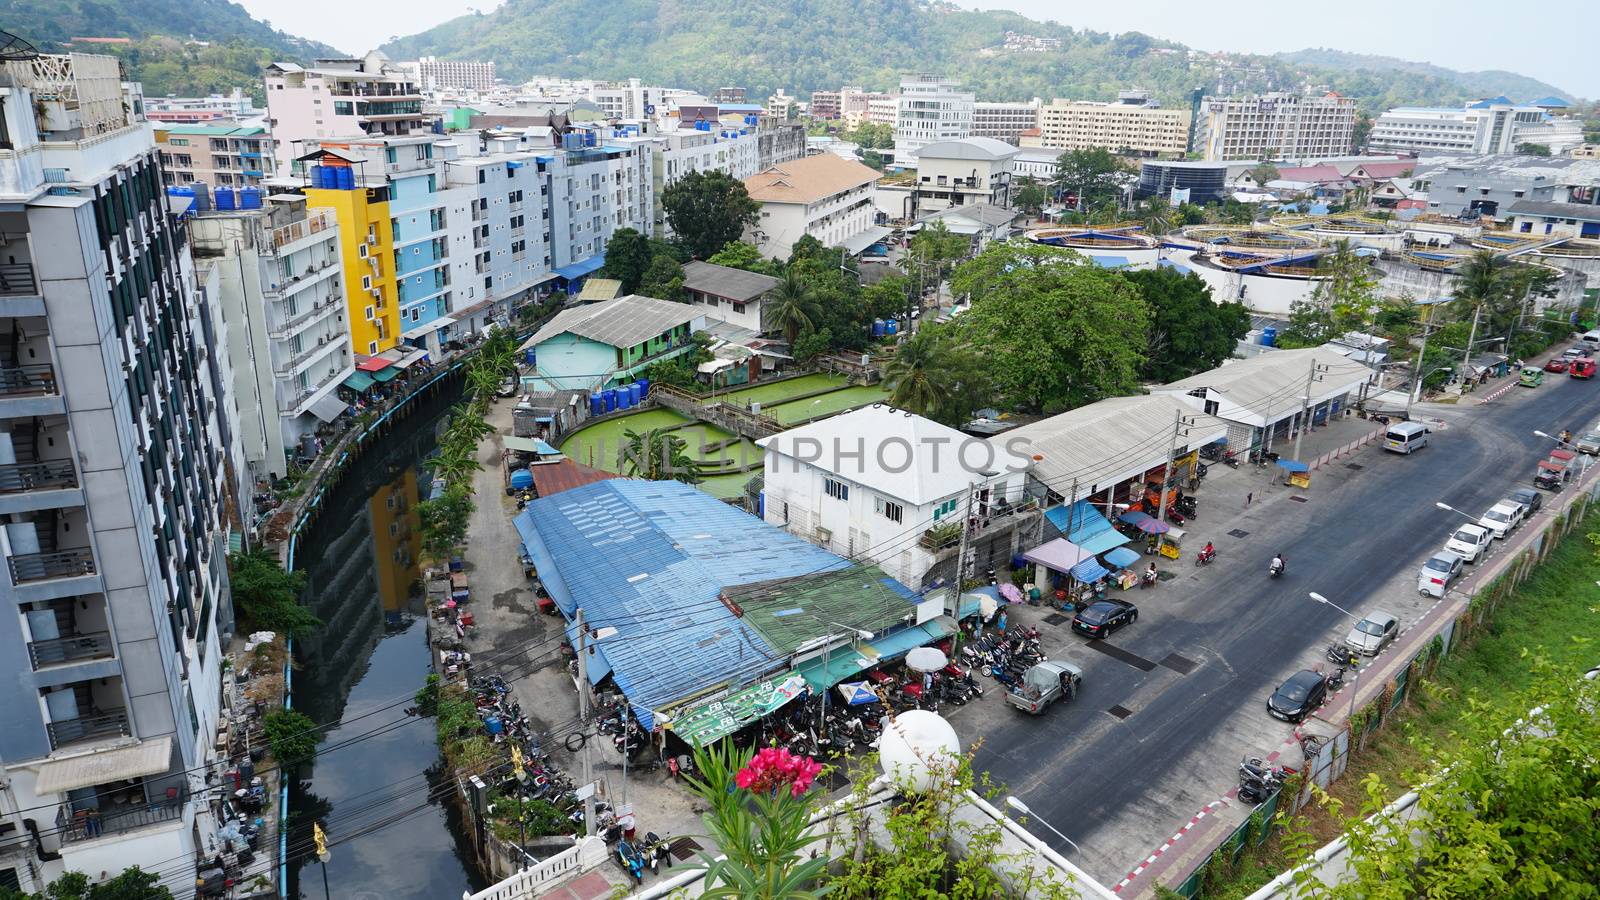 Drone view of the city of Patong, Phuket island. by Passcal